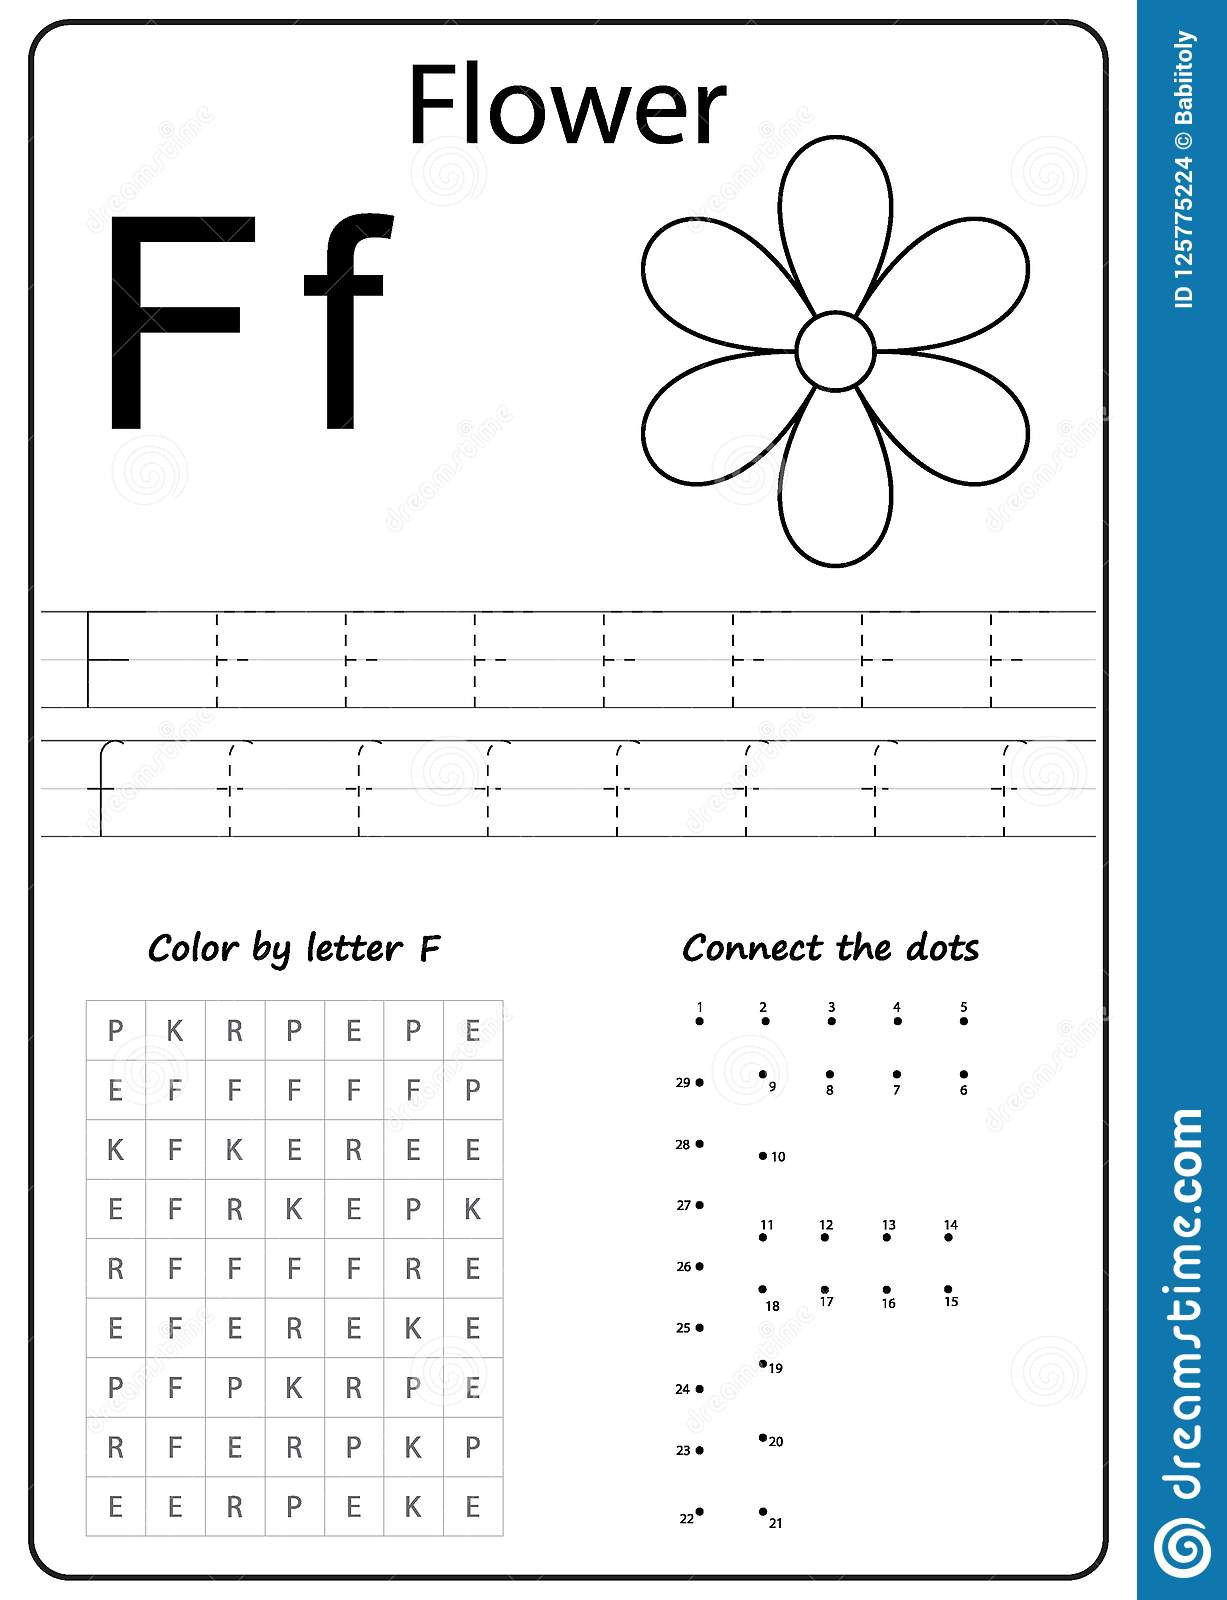 Letter Of The Week F Is Designed To Help Teach Letter F 15 Useful Letter F Worksheets For 